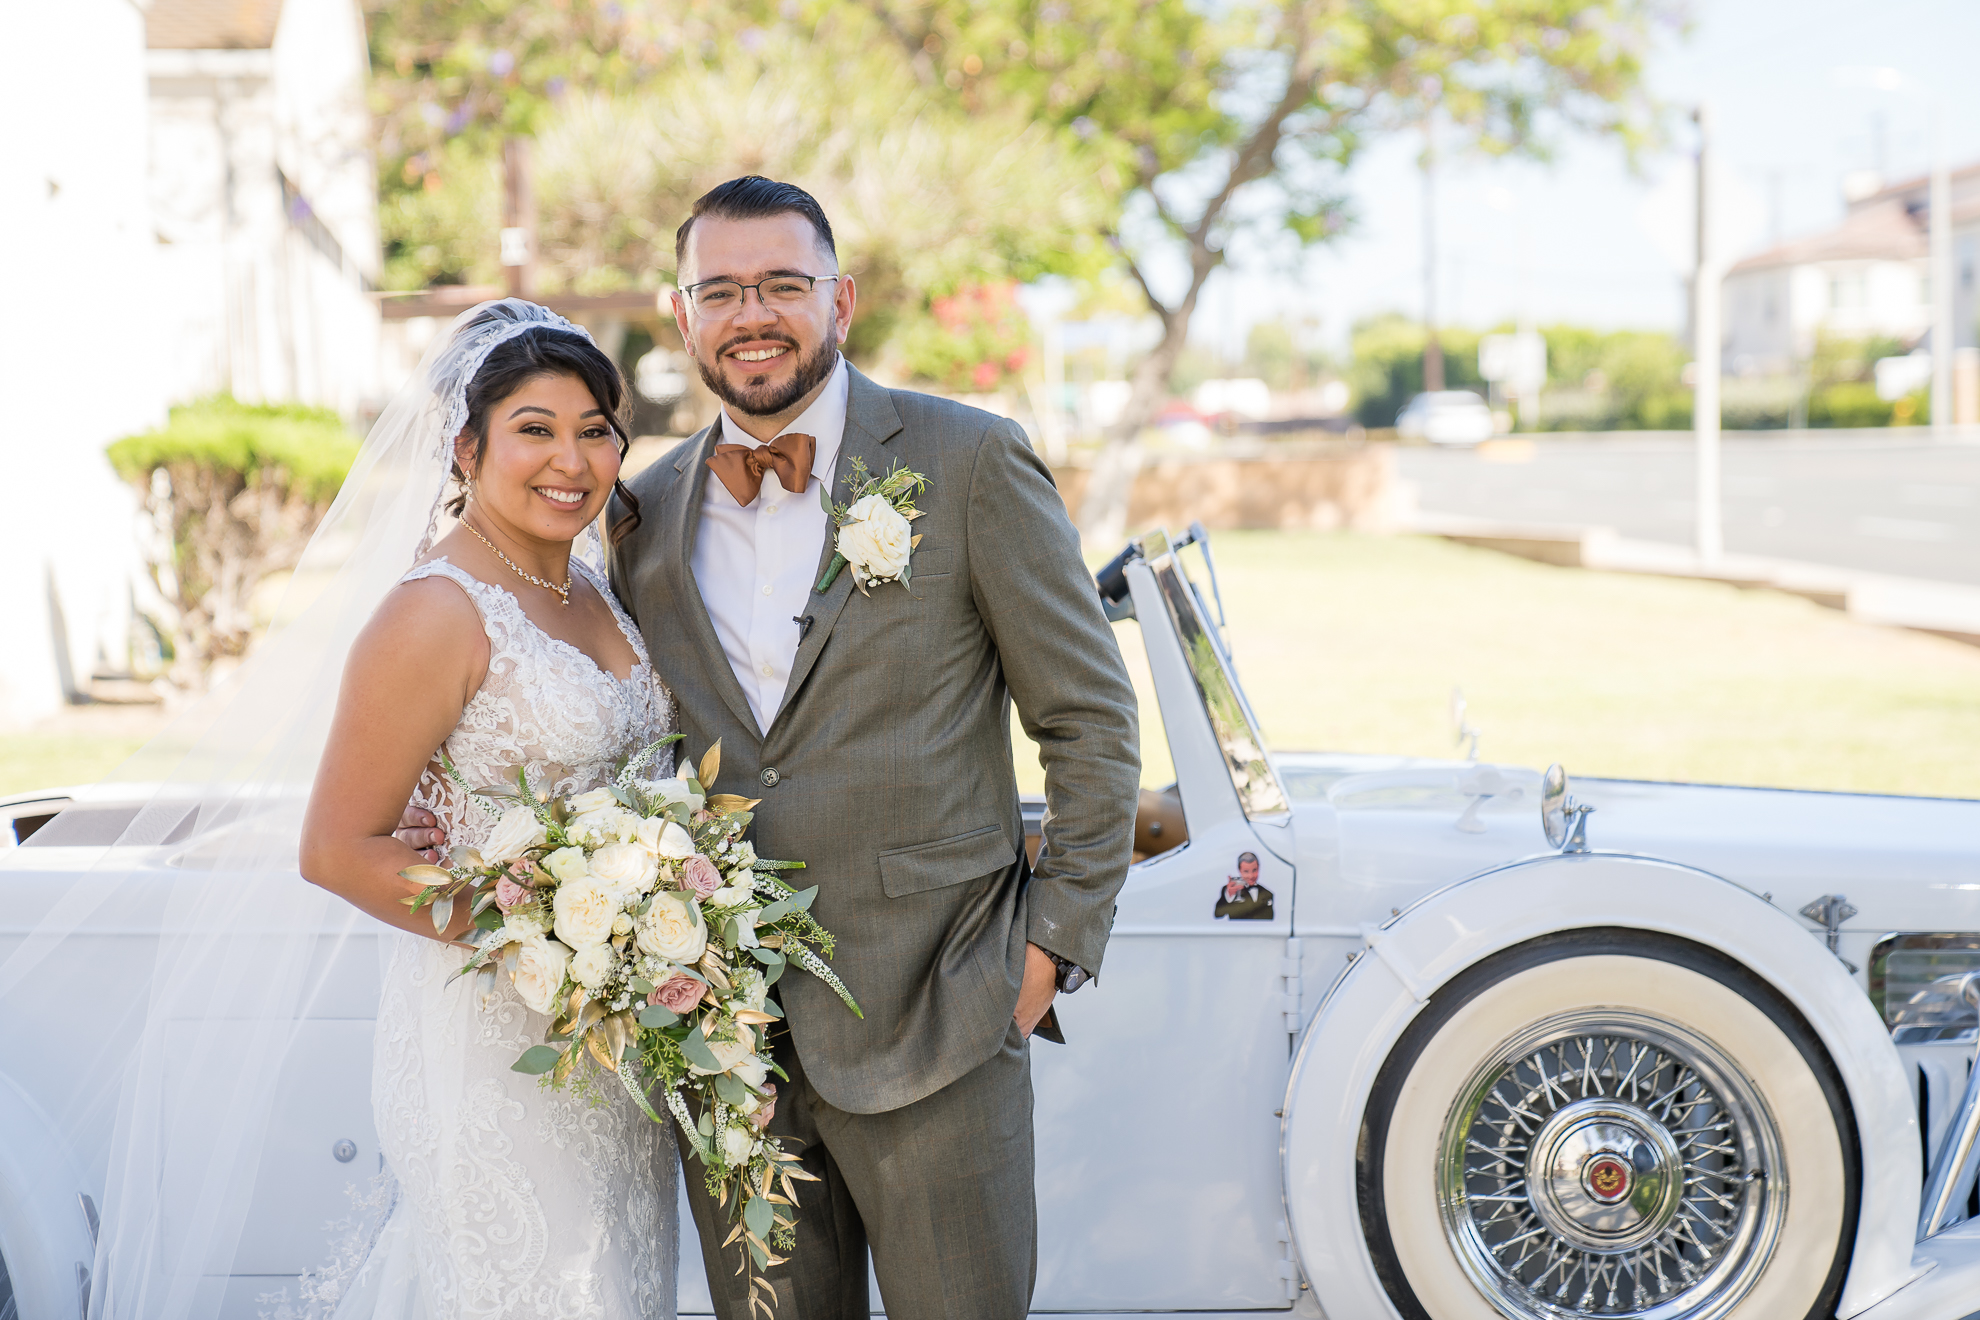 ThomasKim_photography A bride and groom standing next to an antique car at their S & A themed wedding.